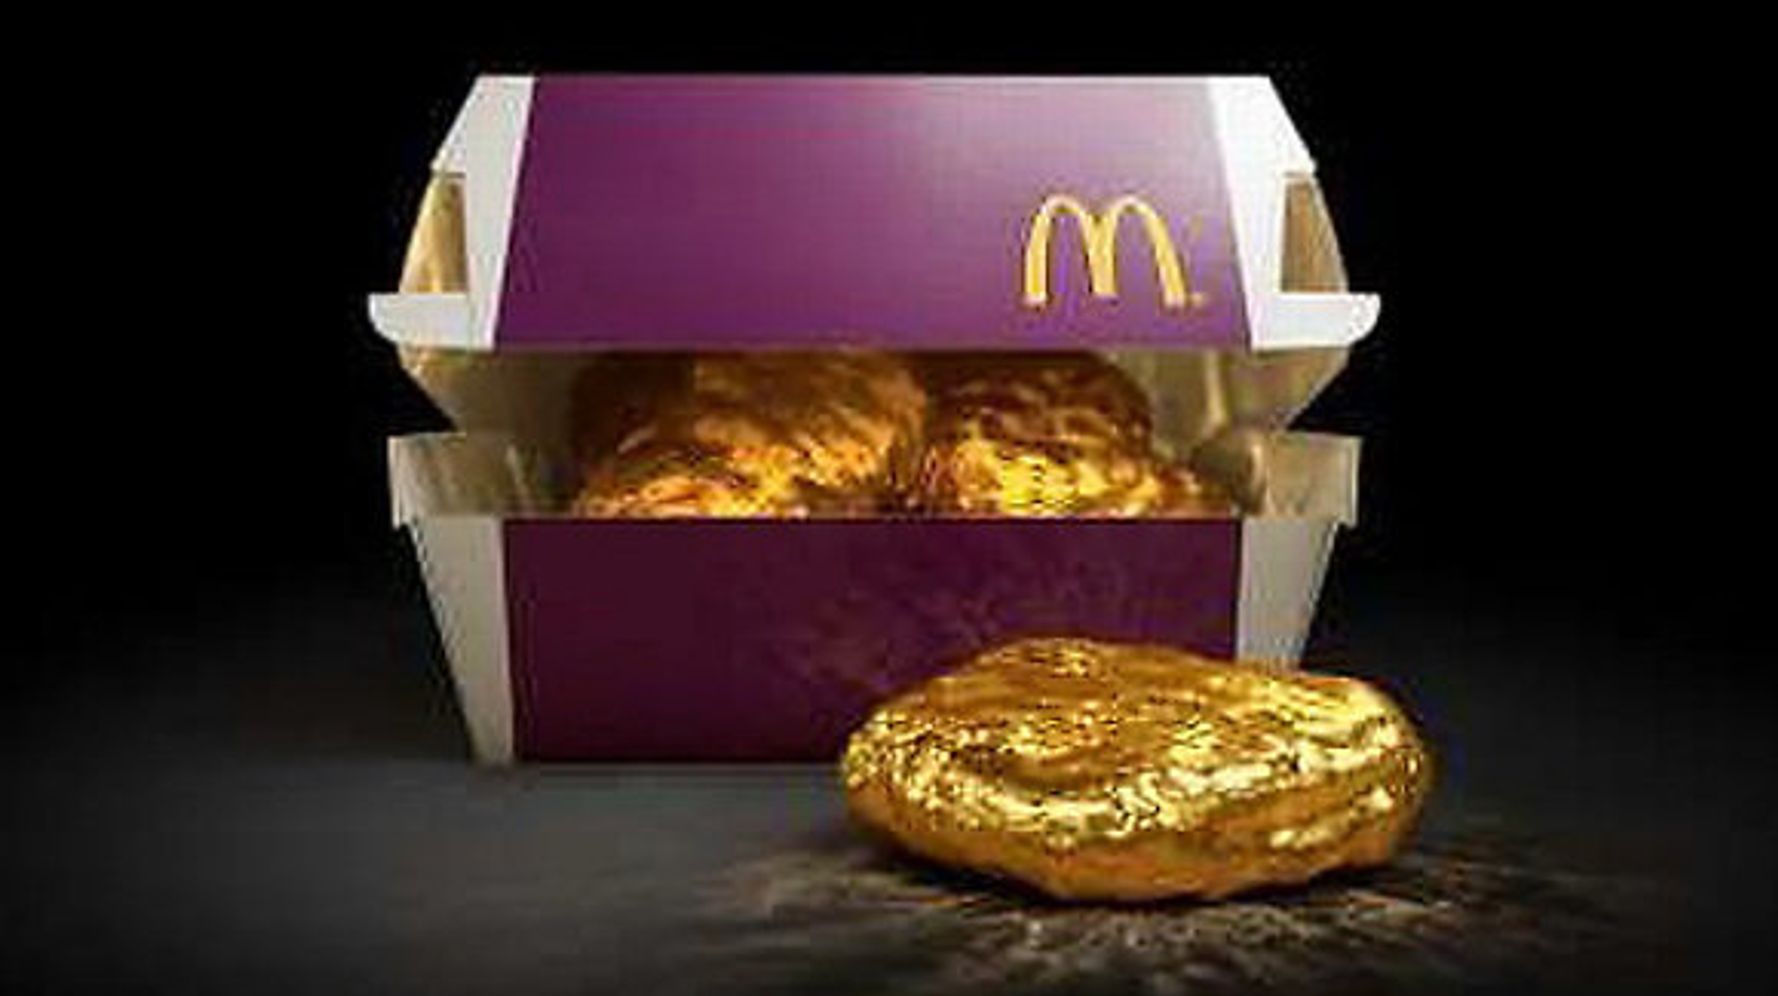 Nuggets Mcdonalds Box Mcdonald S Worker Admits Putting 11 Chicken Mcnuggets In 10 Piece Boxes